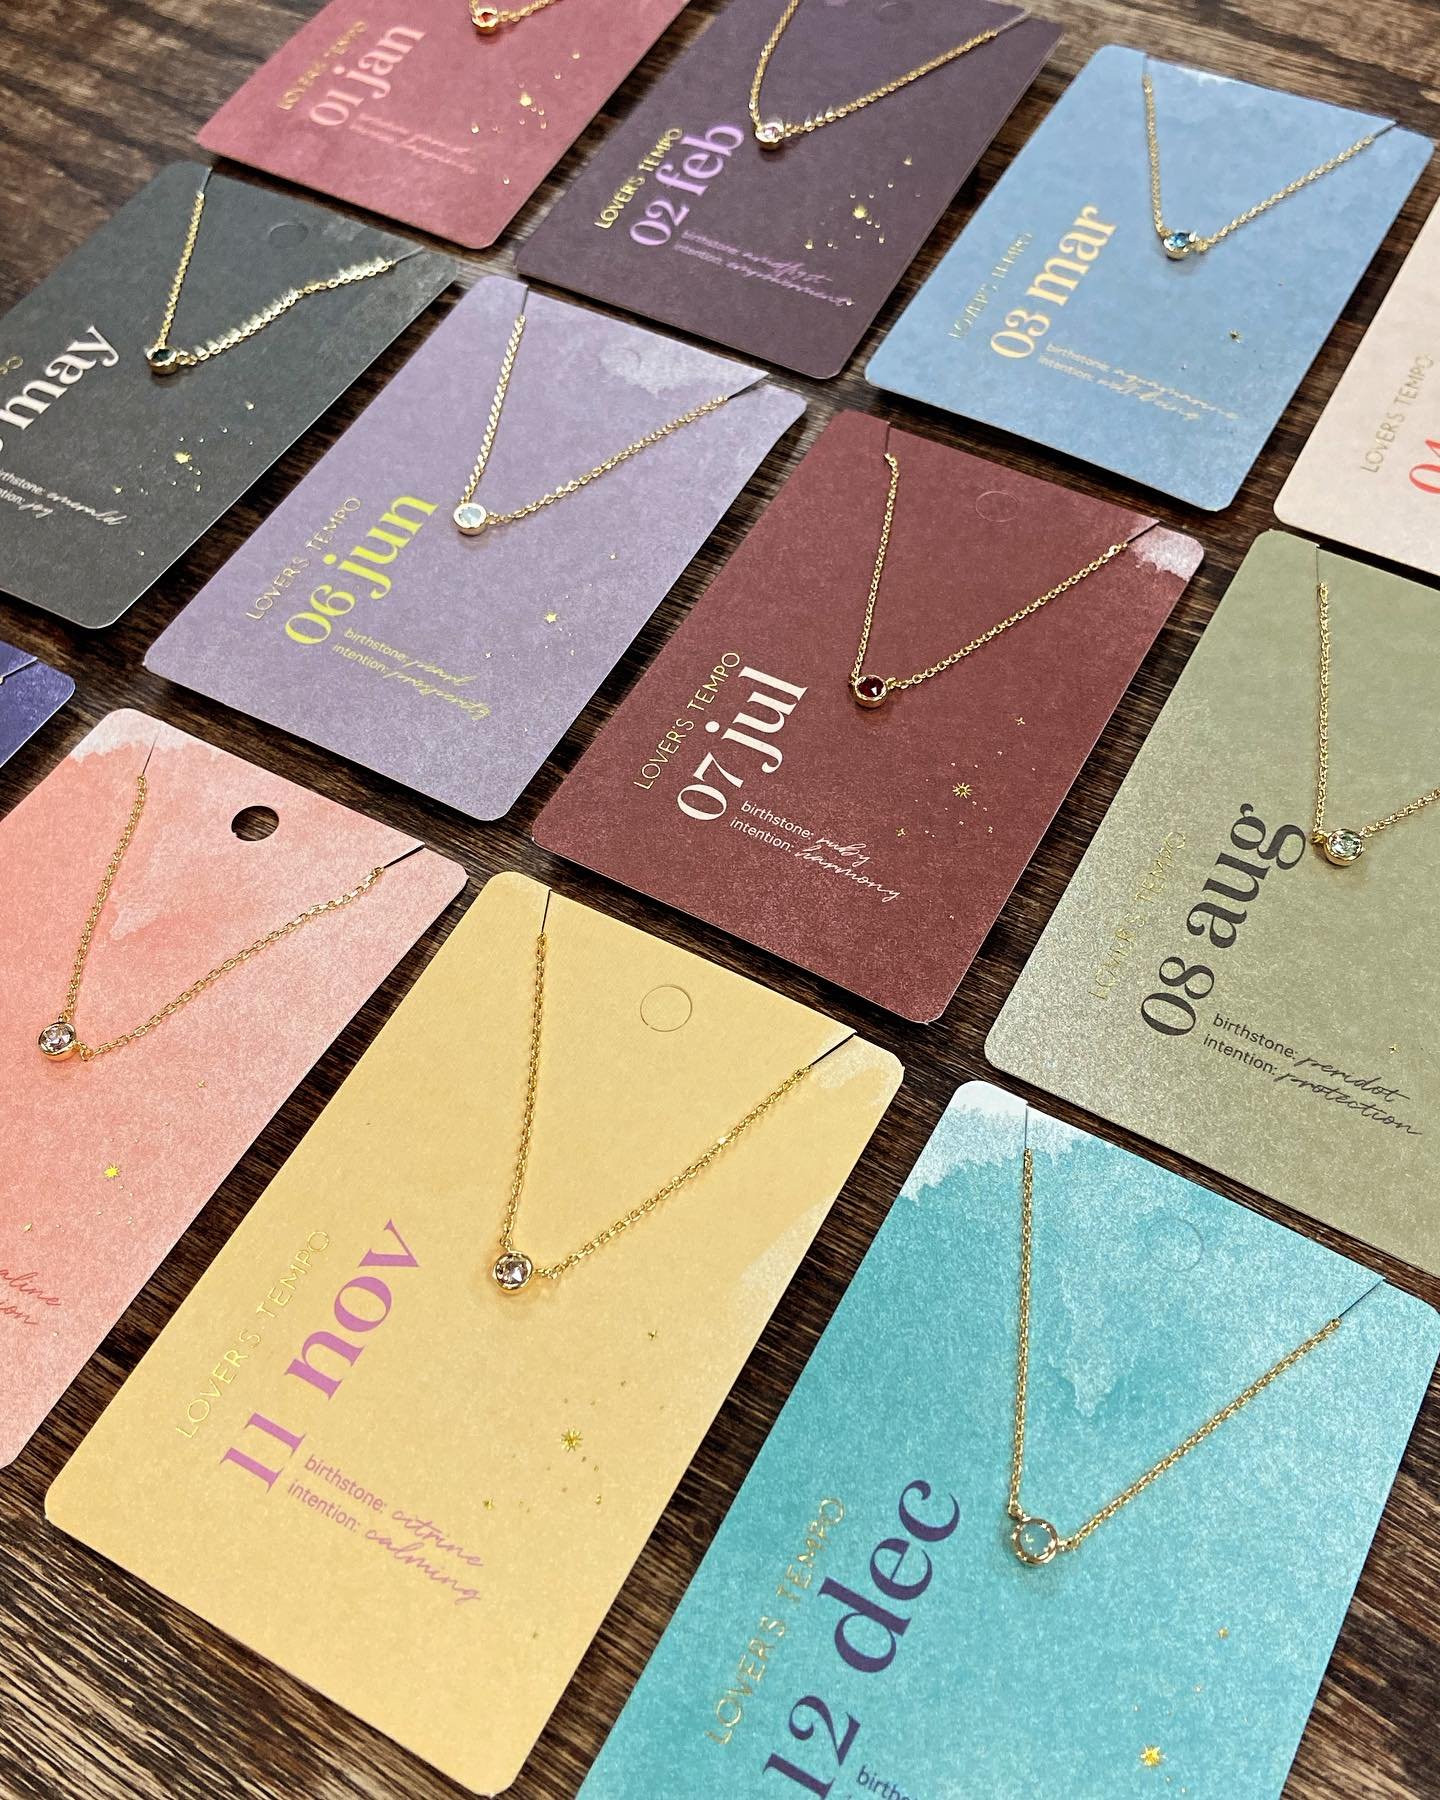 New arrival! These dainty birthstone necklaces are perfect for layering or wearing on their own. A beautiful and thoughtful gift!